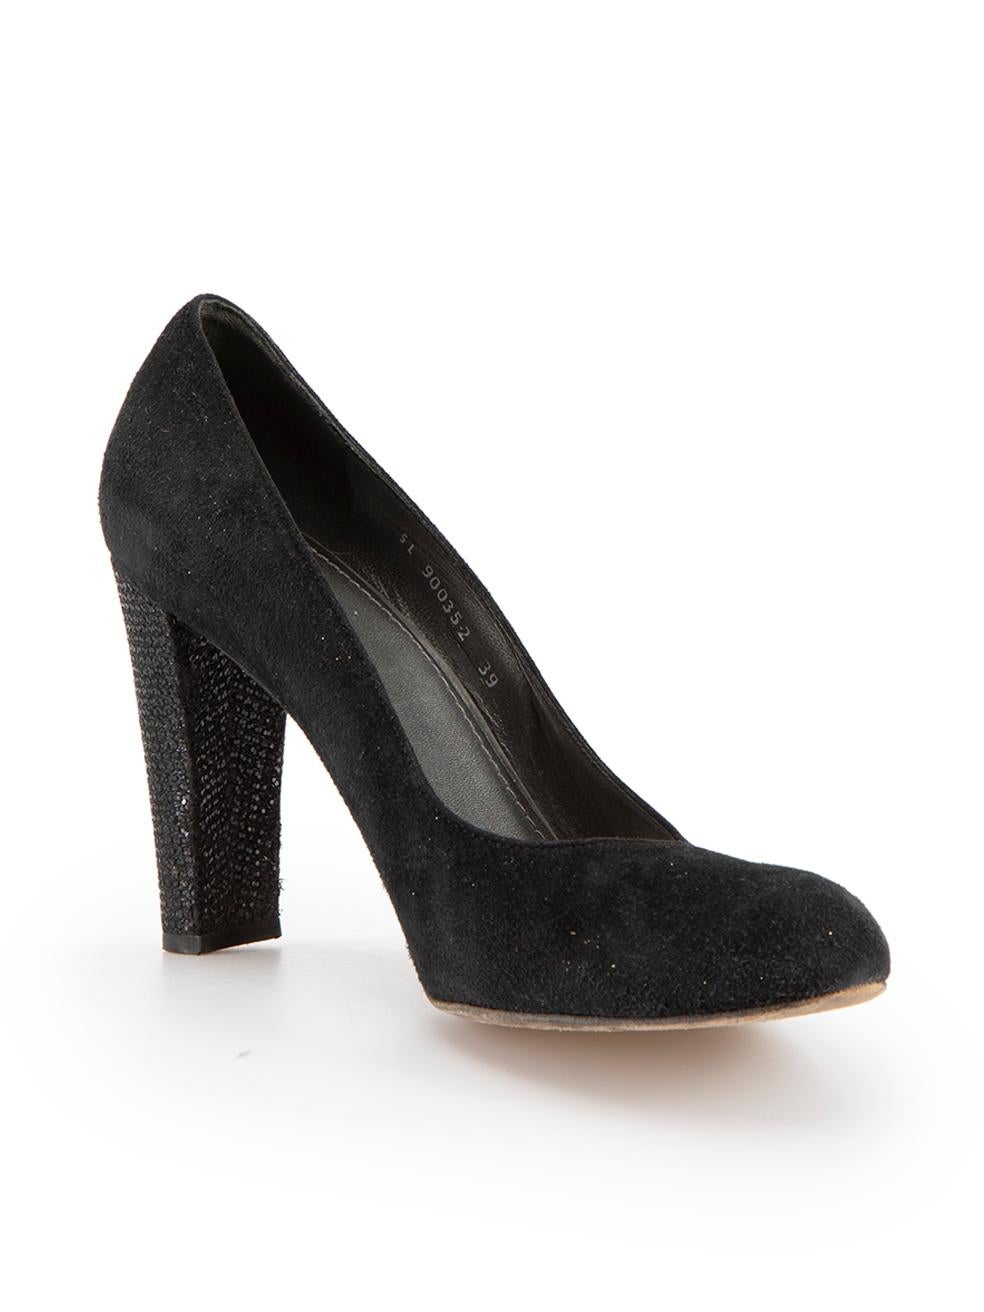 CONDITION is Very good. Minimal wear to shoes is evident. Minimal wear to both shoe heels with scuff marks on this used Stuart Weitzman designer resale item.



Details


Black

Suede

Slip on pumps

Mid heel

Almond toe

Glitter heel 



 

Made in